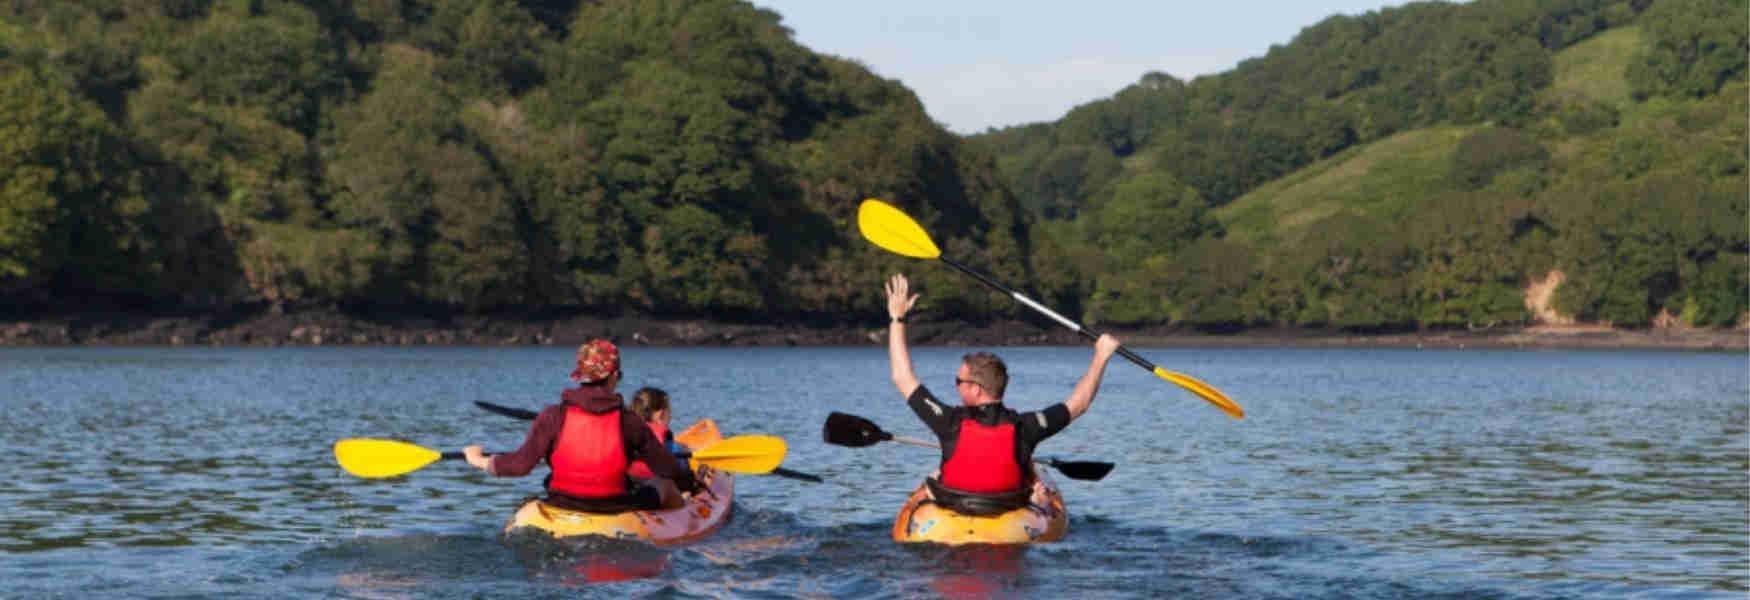 Explore the estuary in a rented kayak (c) Fowey River Hire